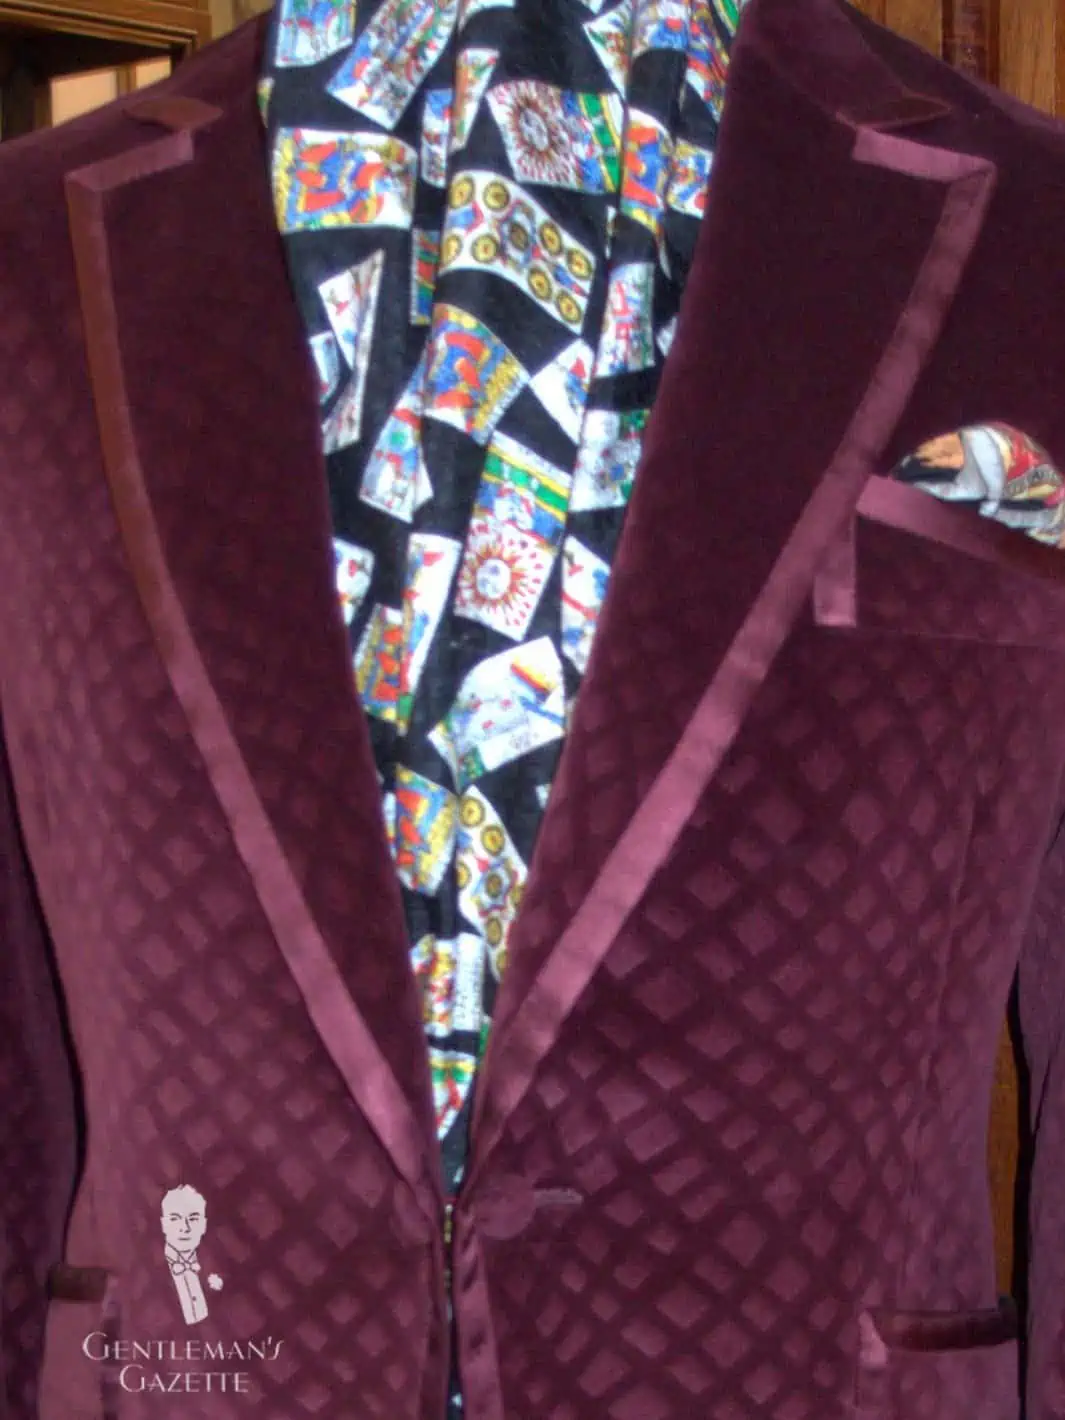 A photograph of a smoking jacket with peaked lapels